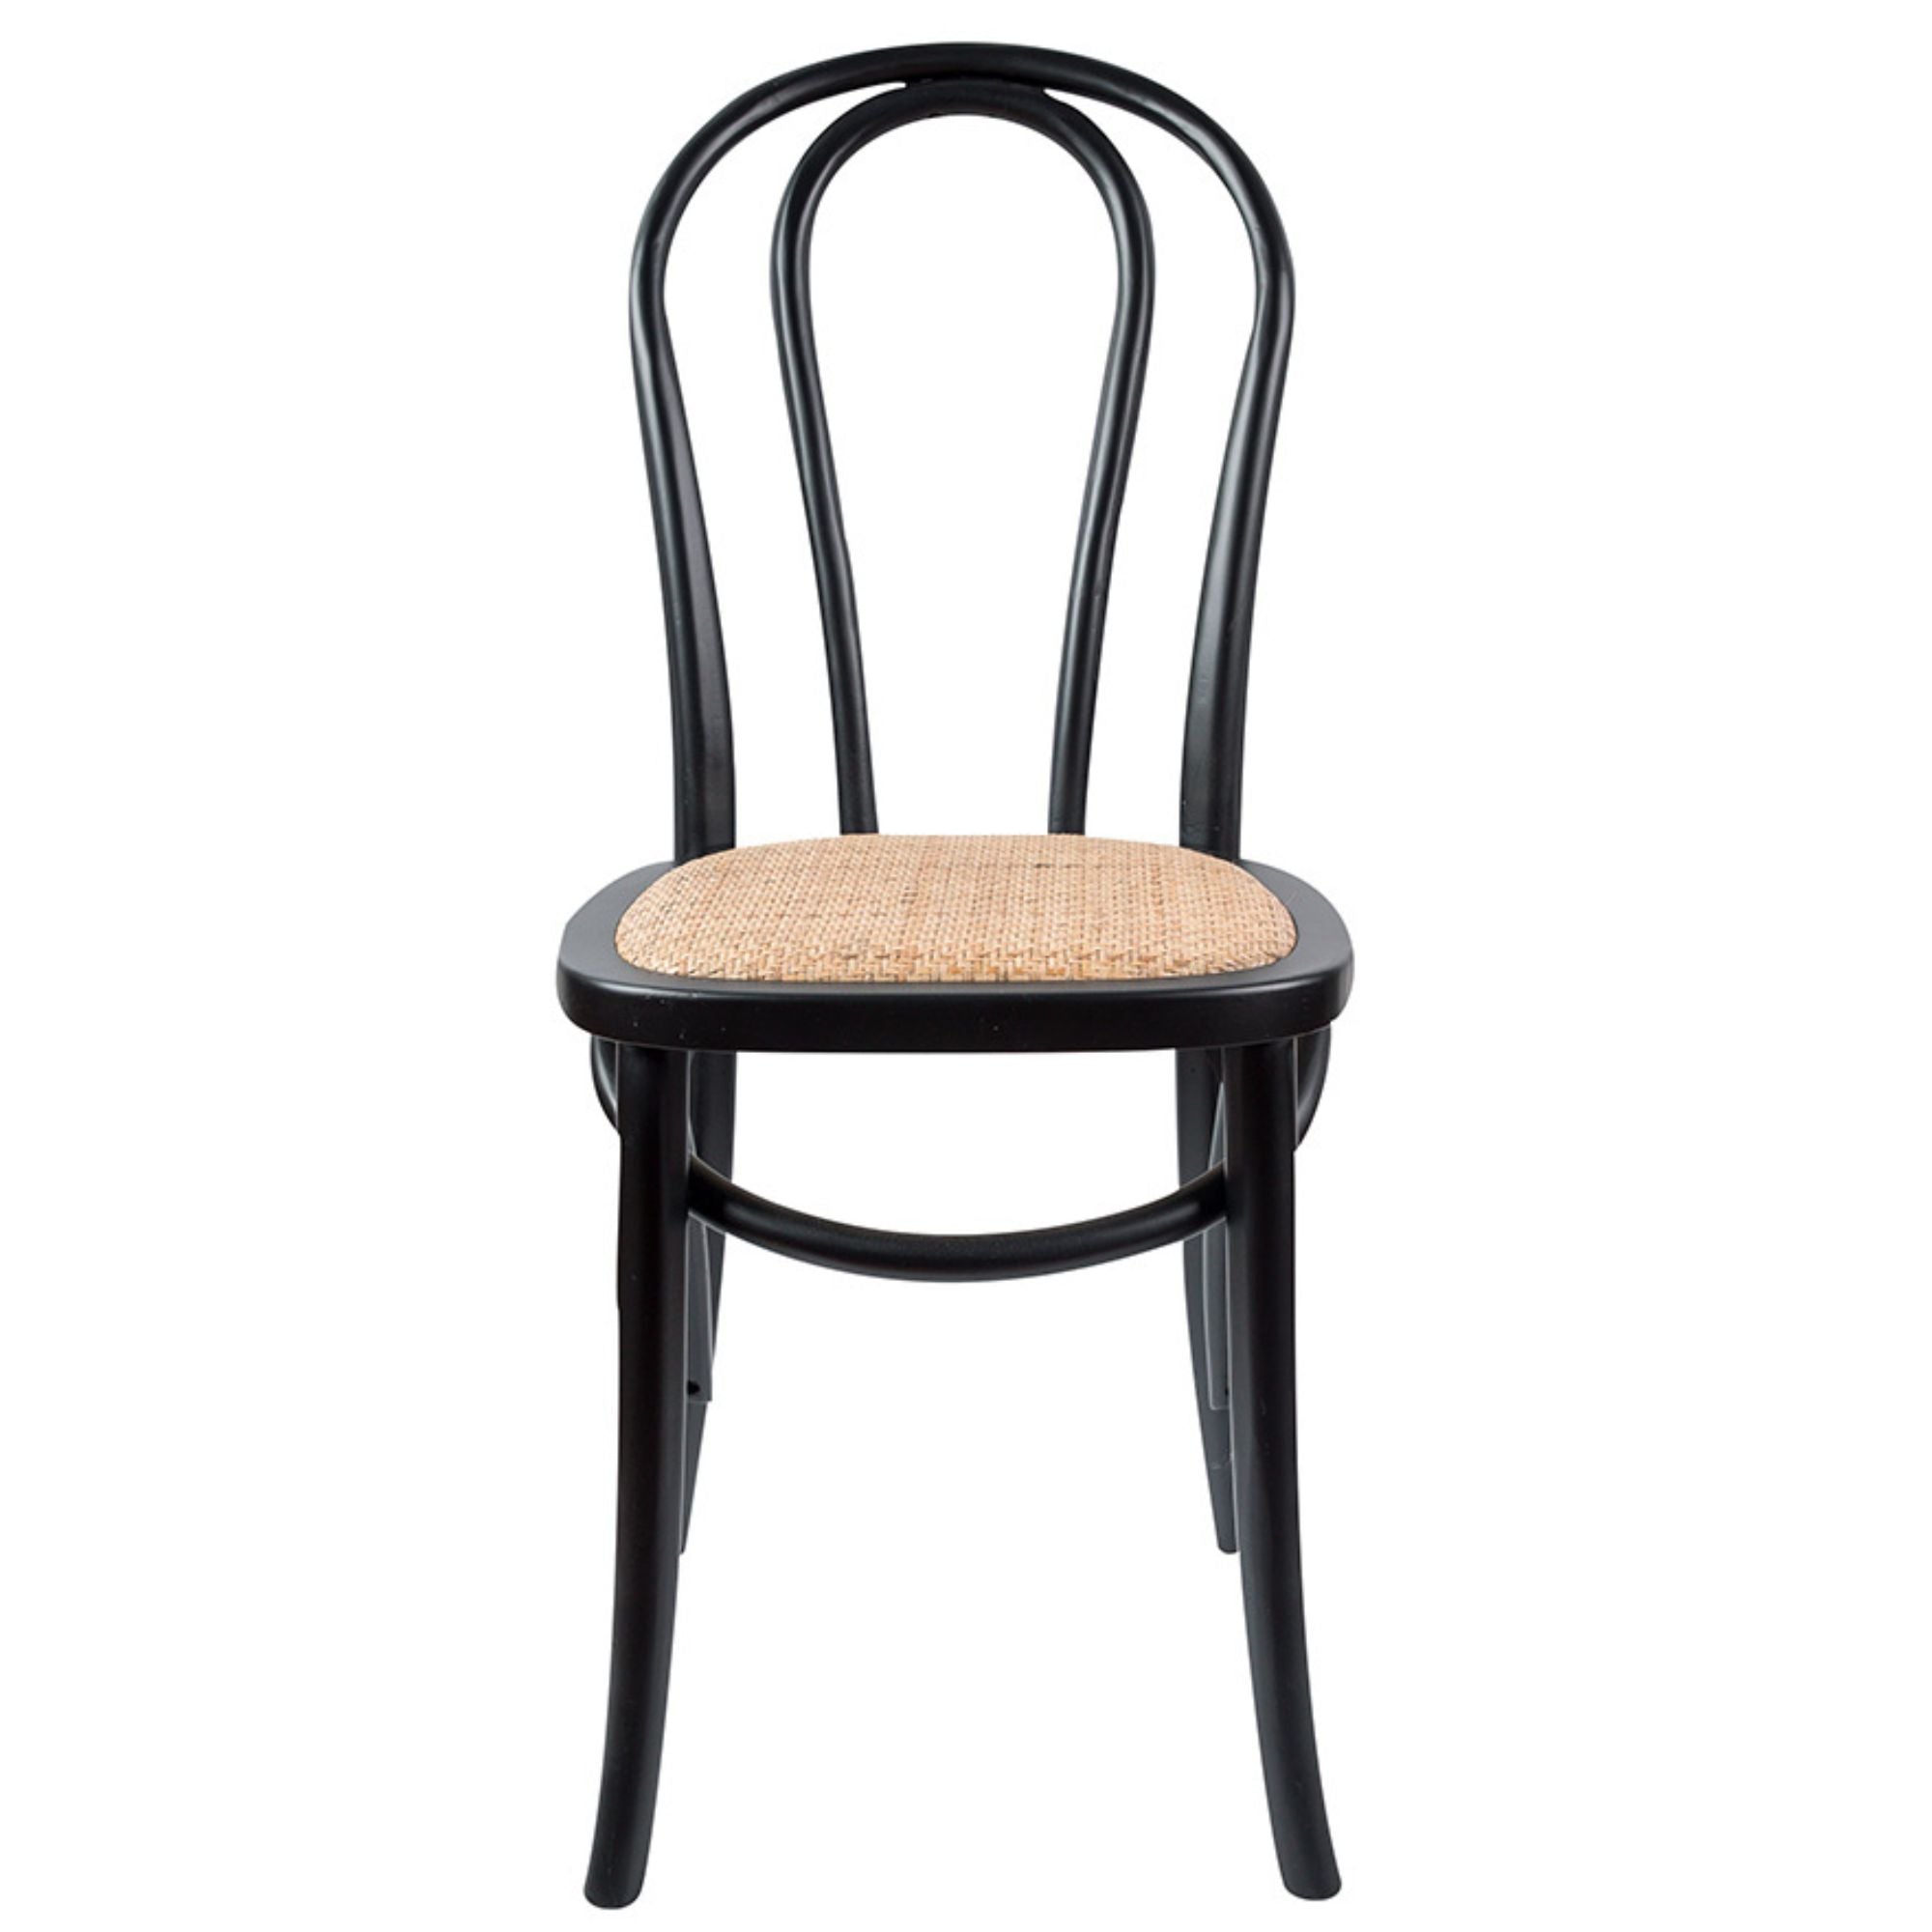 Arched Back Dining Chair 4 Set Solid Elm Timber Wood Rattan Seat - Black